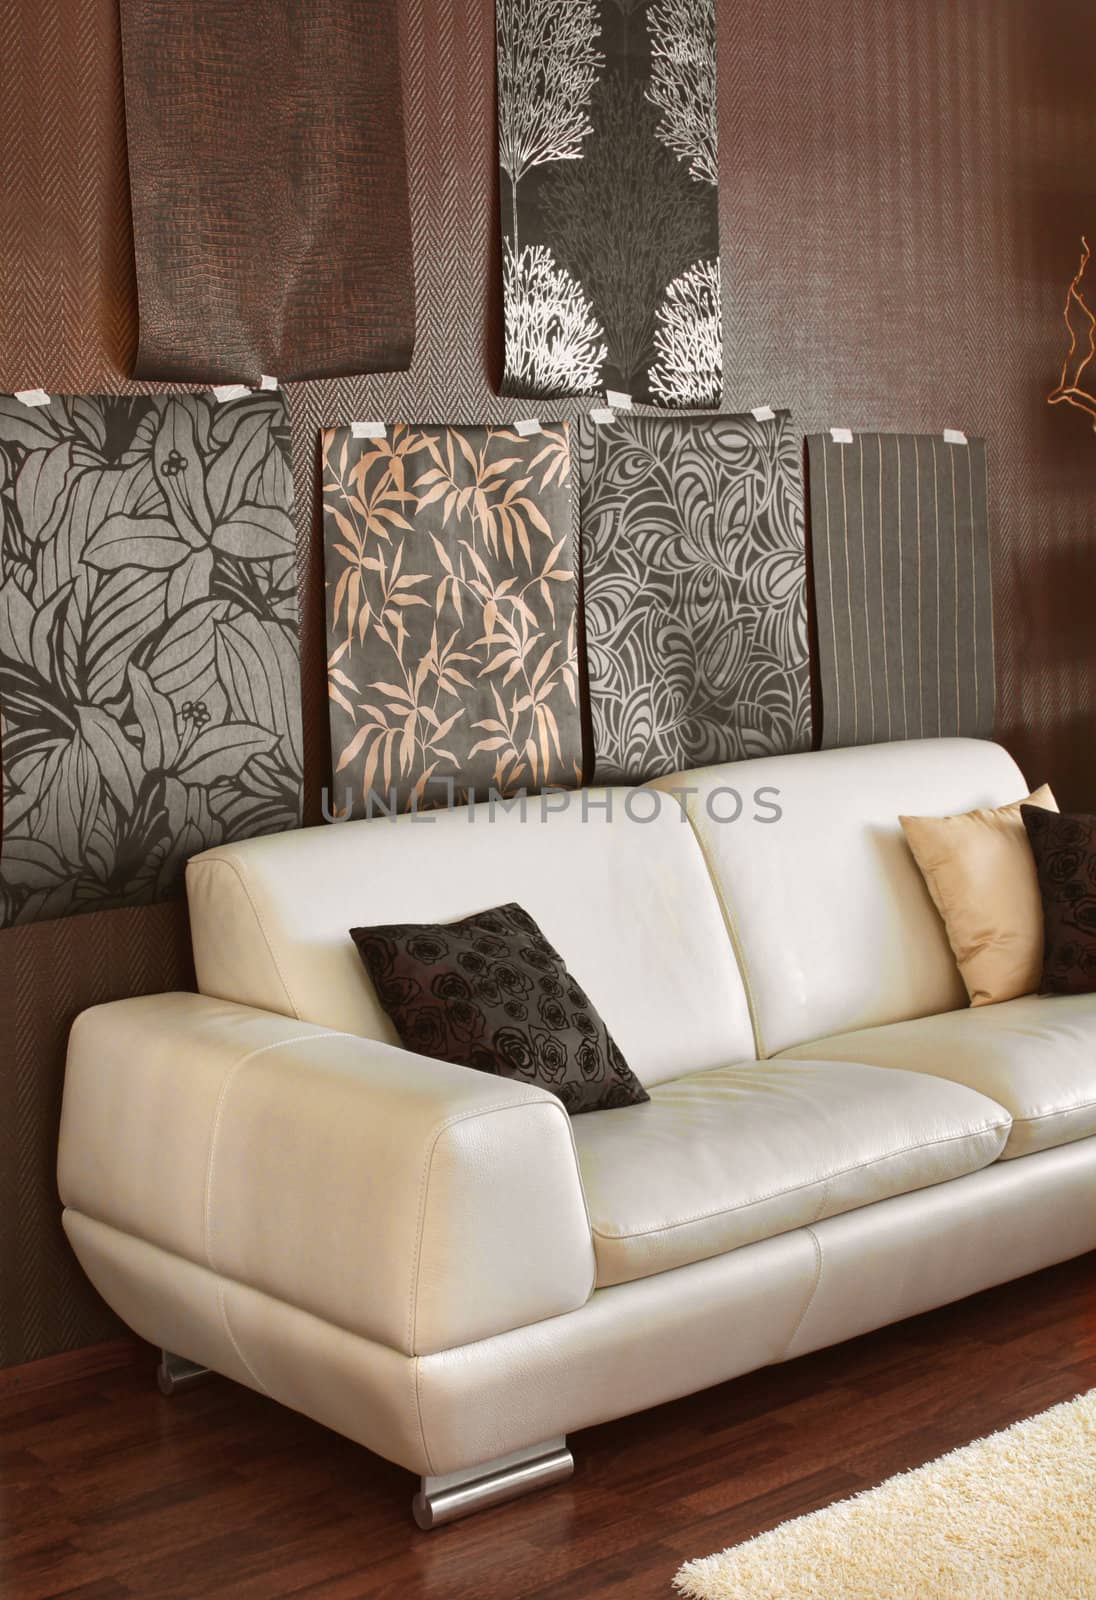 Selecting perfect wallpaper by anterovium